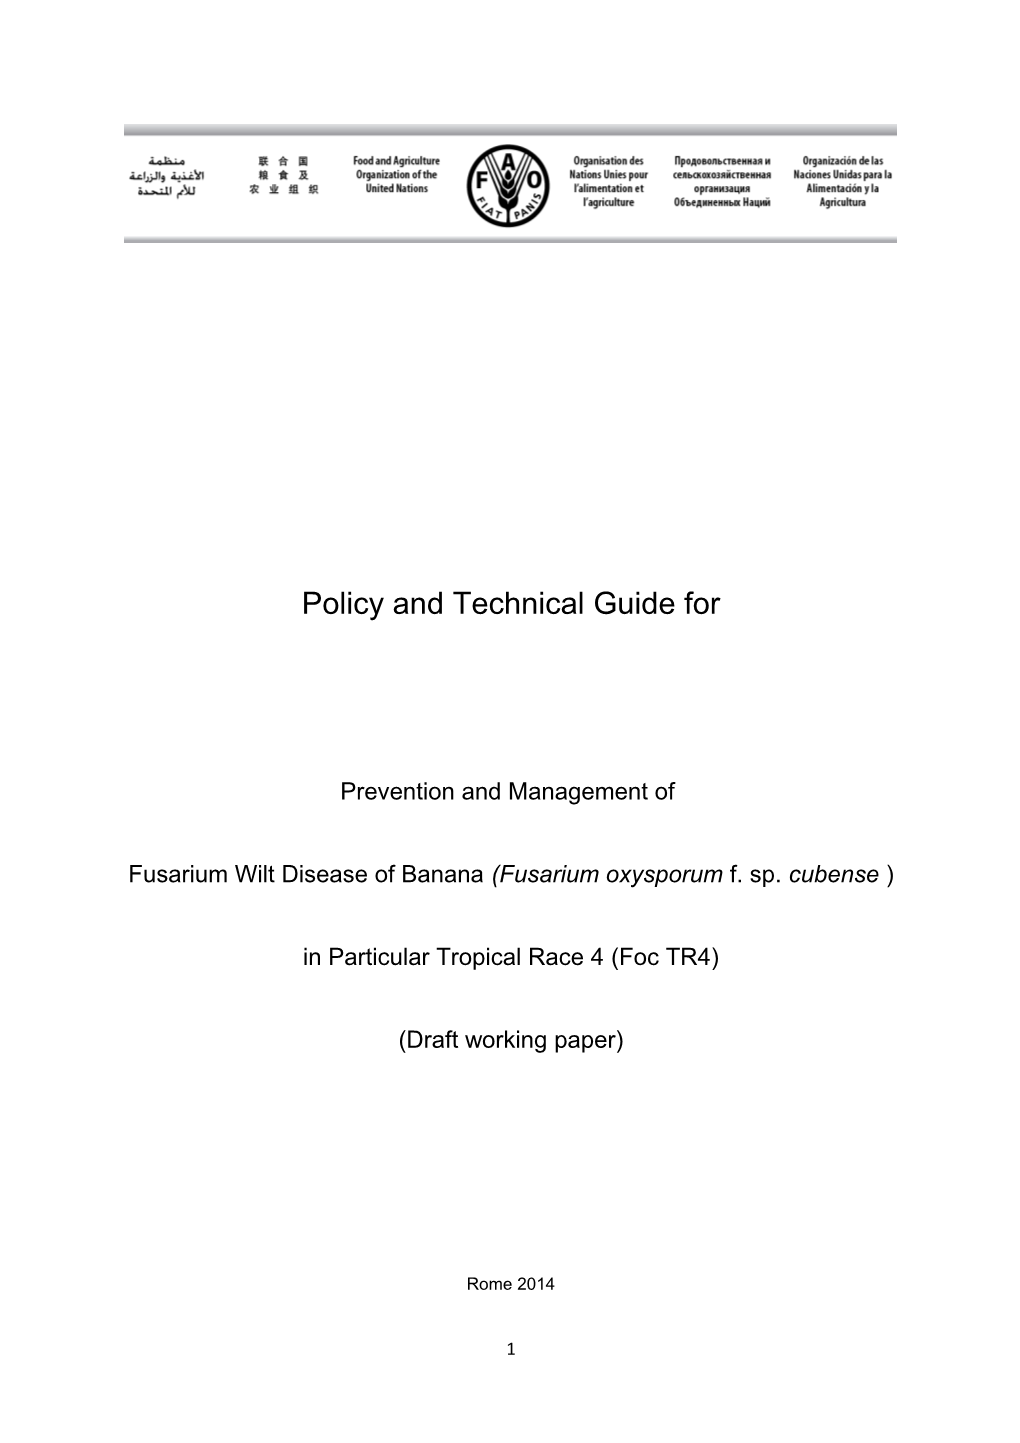 Policy and Technical Guide For